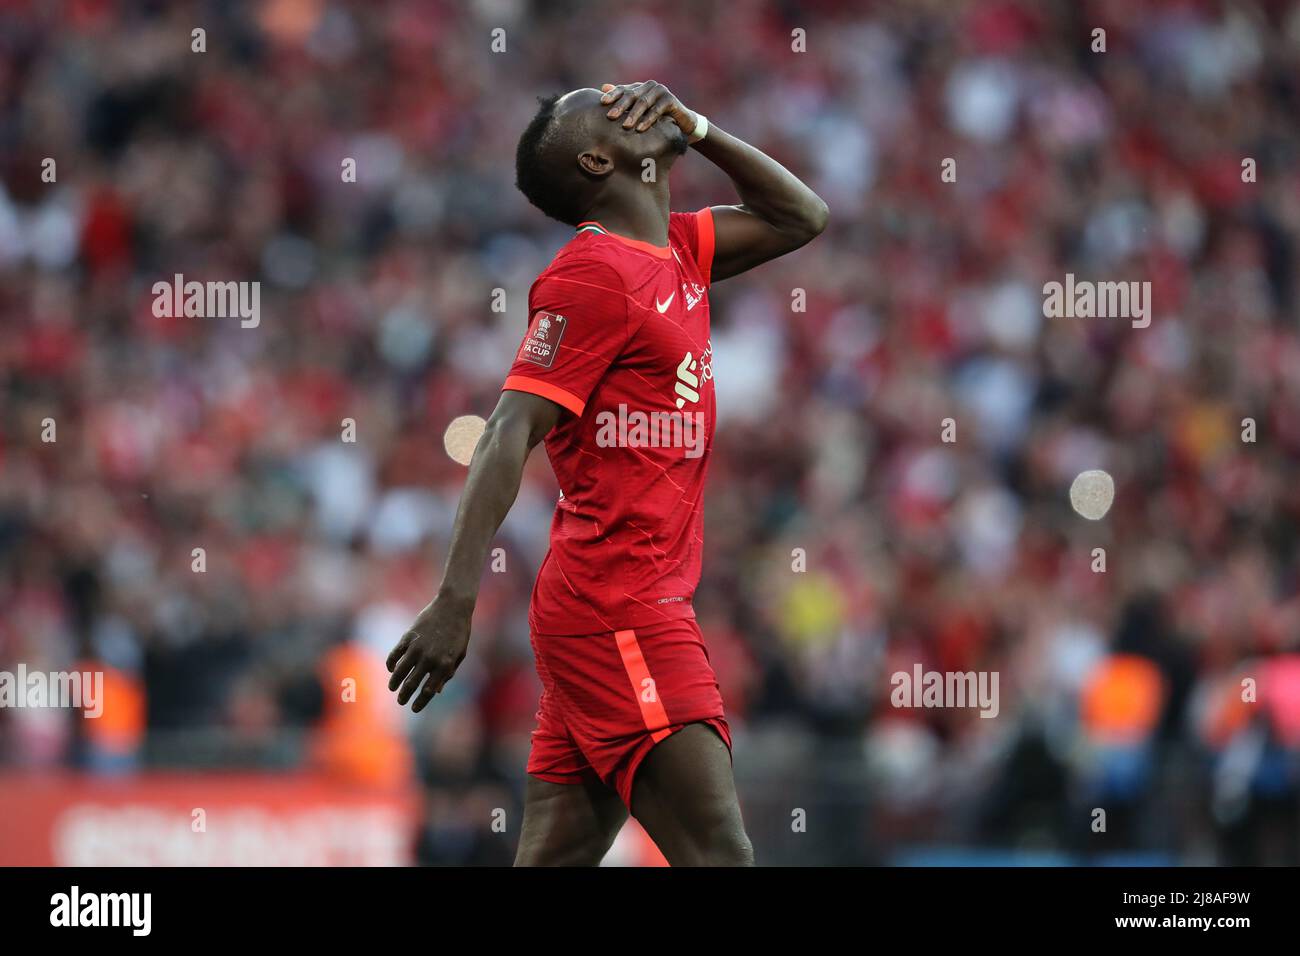 SADIO MANE AFTER PENALTY, CHELSEA V LIVERPOOL, 2022 Stock Photo